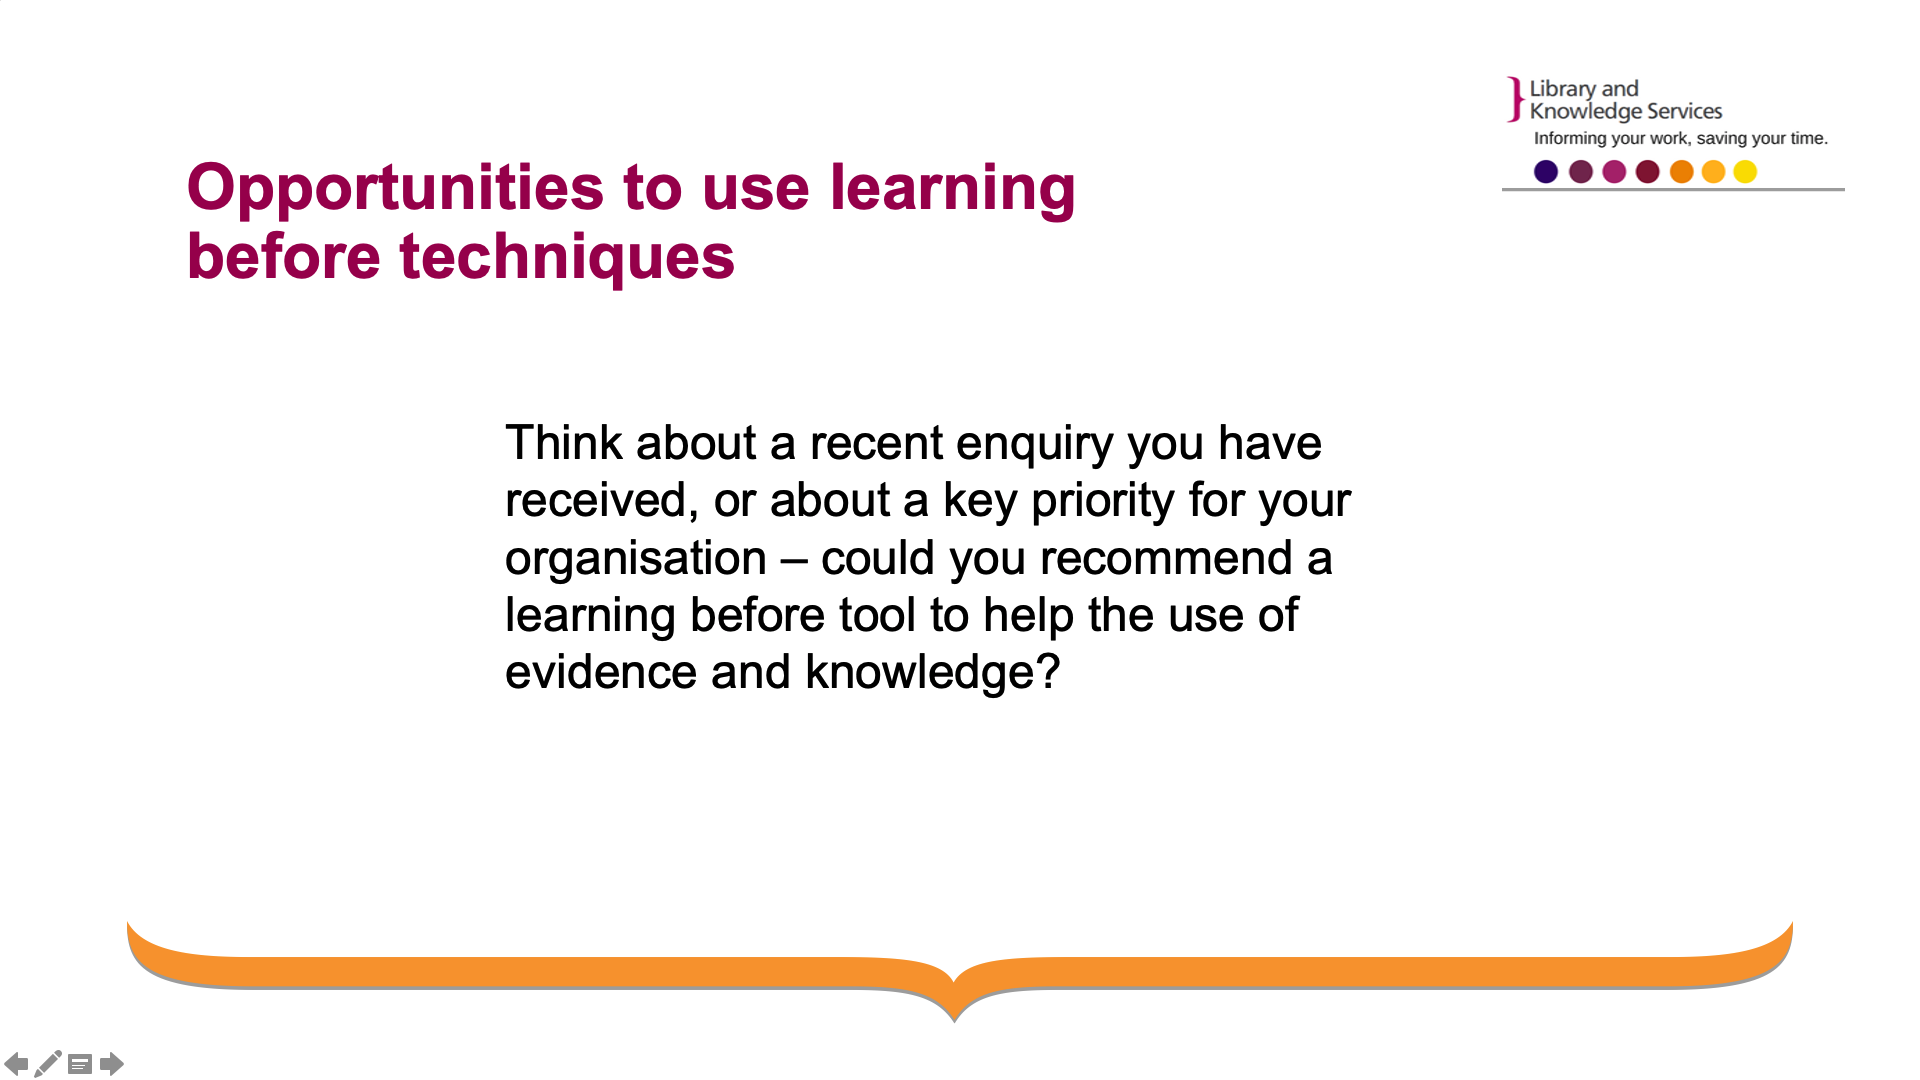 Slide 10: textbox reading: Think about a recent enquiry you have received, or about a key priority for your organisation – could you recommend a learning before tool to help the use of evidence and knowledge?